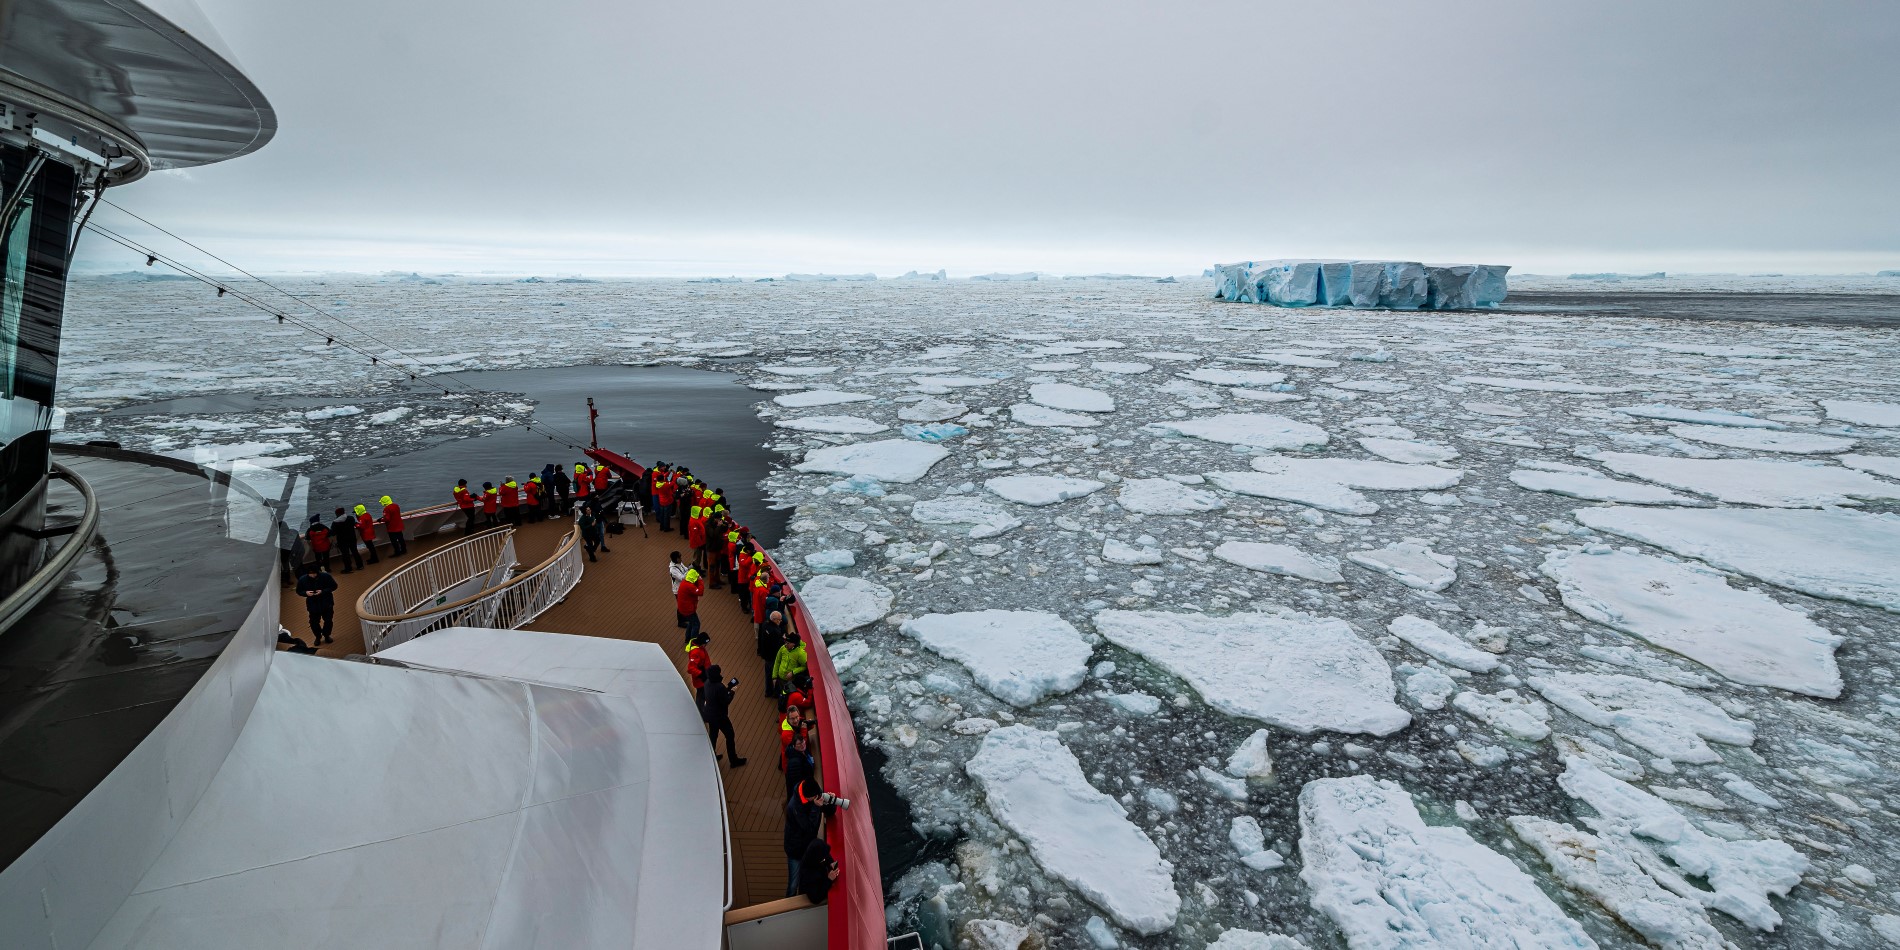 Hurtigruten’s MS Roald Amundsen Makes History by Traveling the Furthest South of Any Company Ship.